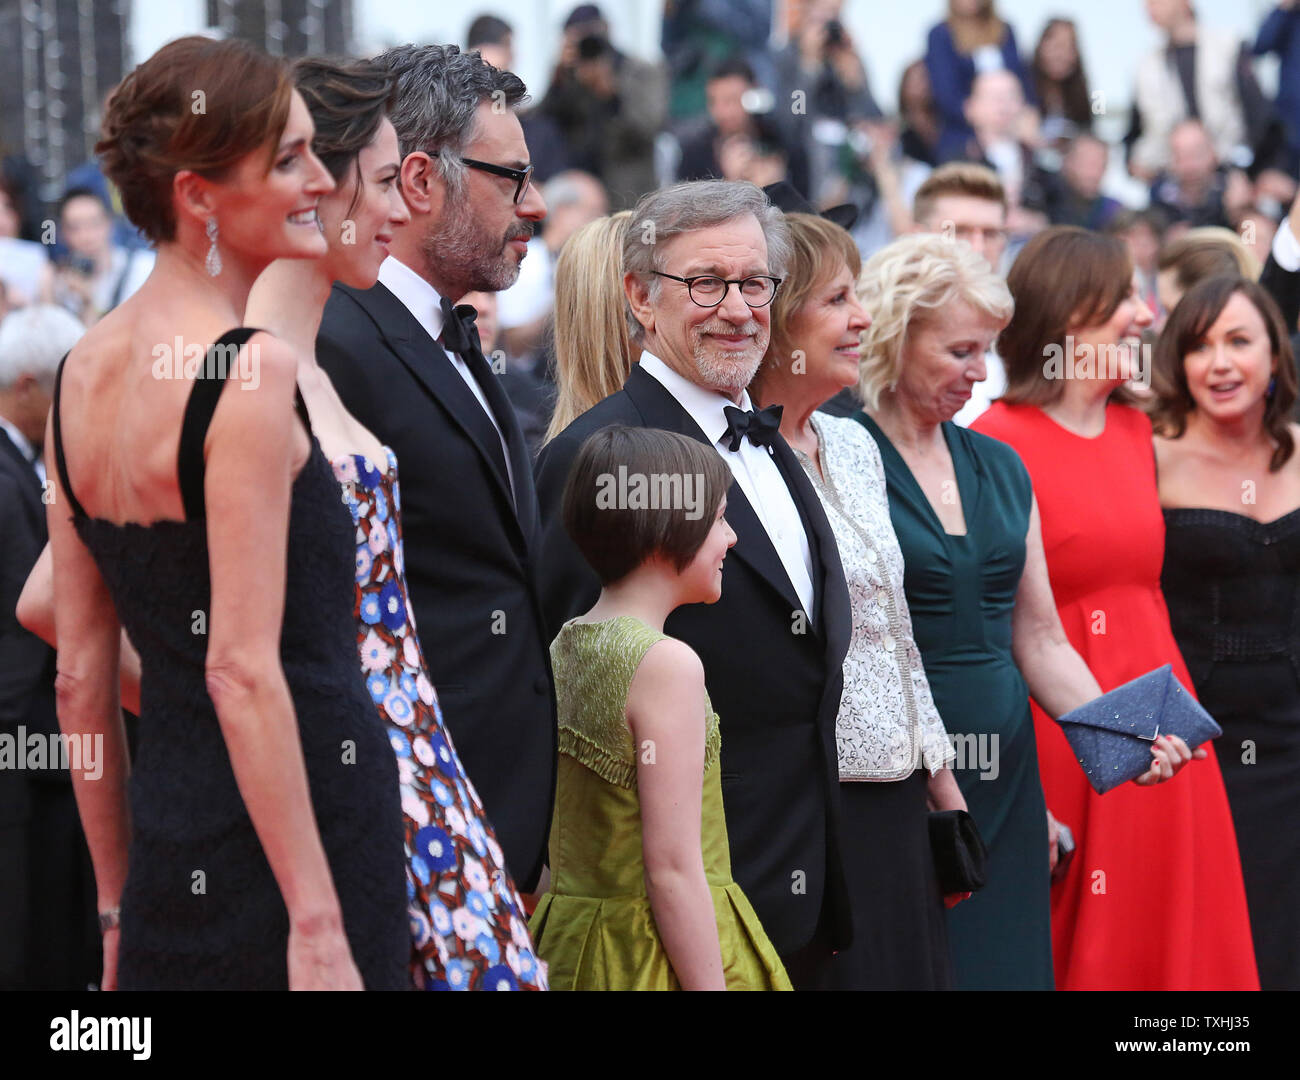 The team from The BFG, including Kristie Macosko, Frank Marshall, Kathleen Kennedy, Kate Capshaw, Steven Spielberg, Ruby Barnhill, Mark Rylance, Claire van Kampen, Lucy Dahl, Penelope Wilton and Rebecca Hall, arrives on the red carpet before the screening of the film 'The BFG' at the 69th annual Cannes International Film Festival in Cannes, France on May 14, 2016.  Photo by David Silpa/UPI Stock Photo